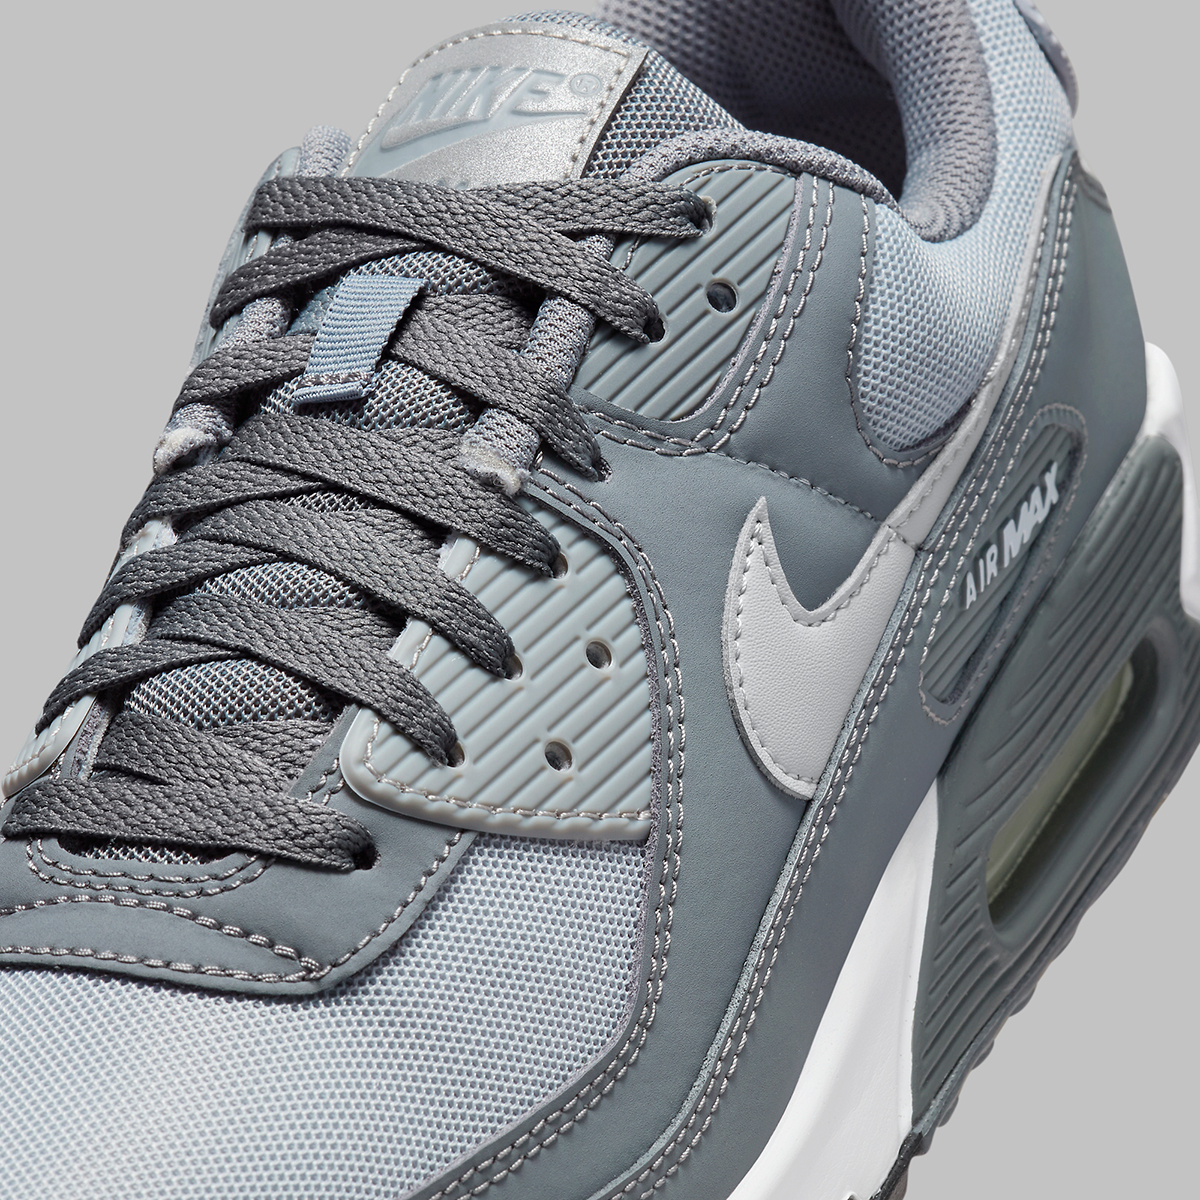 Nike Nike Air One Gets Gummed-Out Reflective Tongue Grey Hm0625 002 1